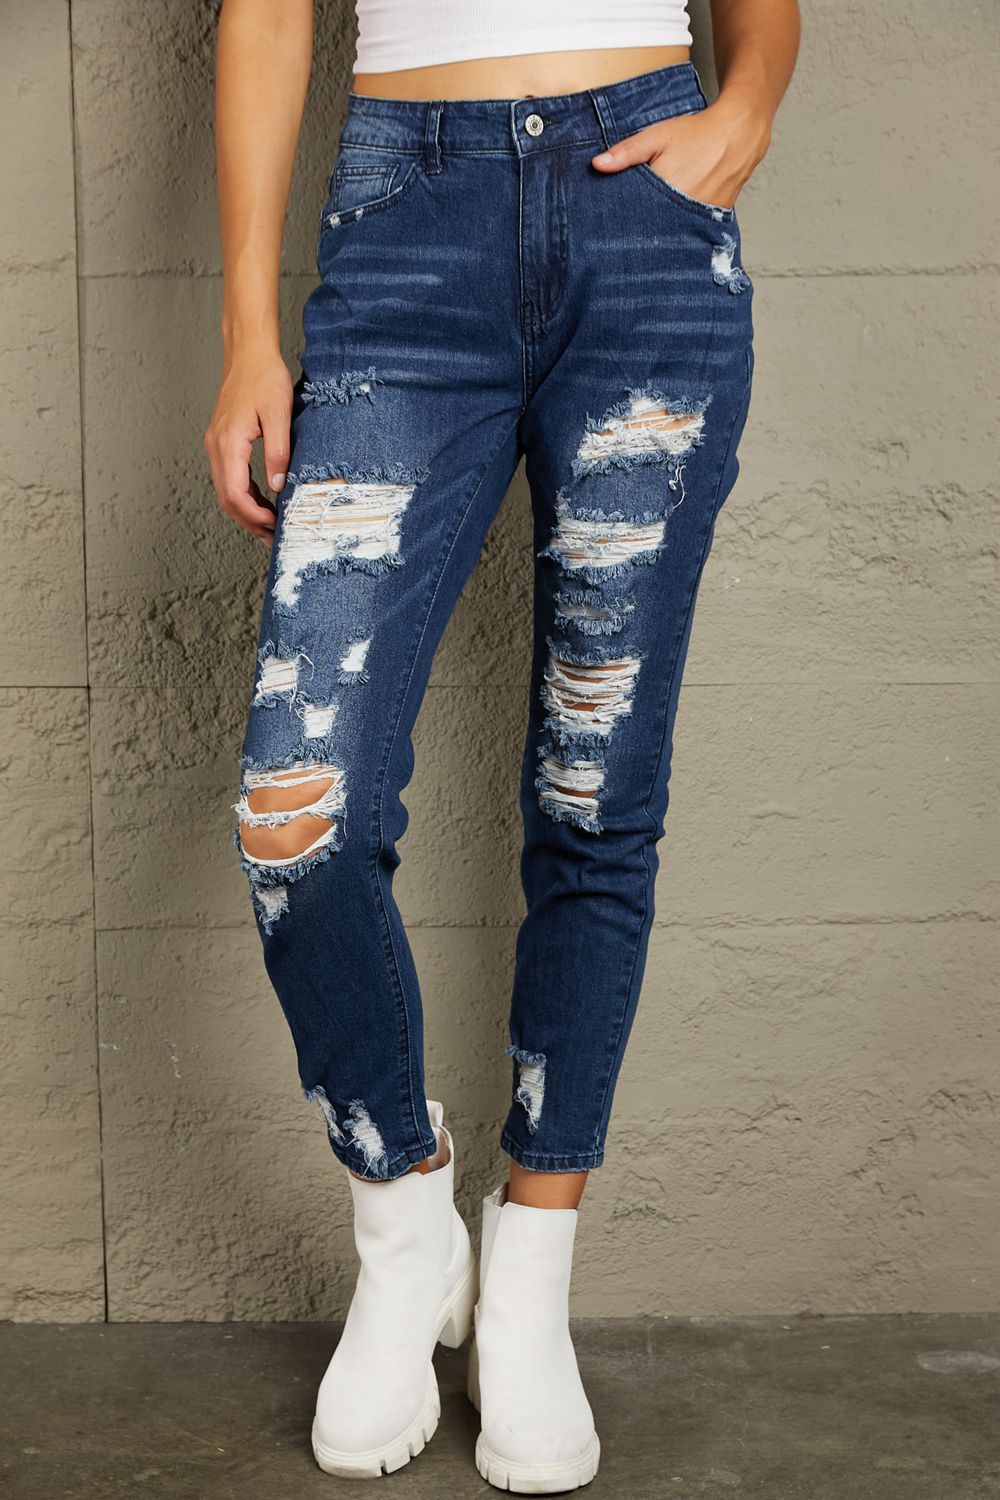 Baeful Distressed High Waist Jeans with Pockets